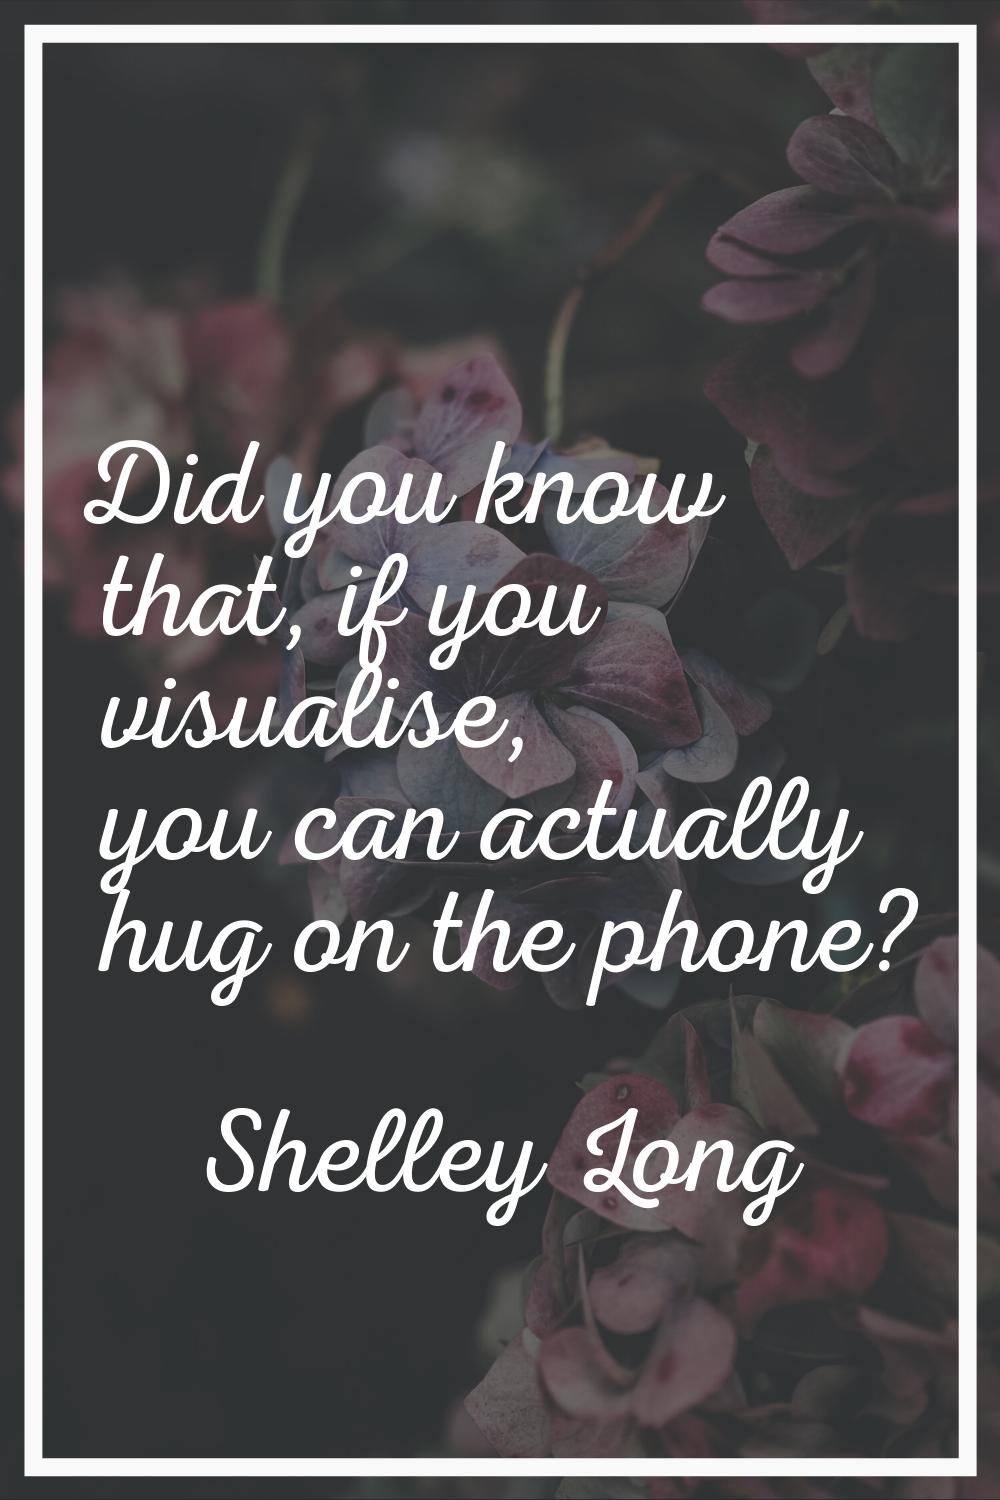 Did you know that, if you visualise, you can actually hug on the phone?